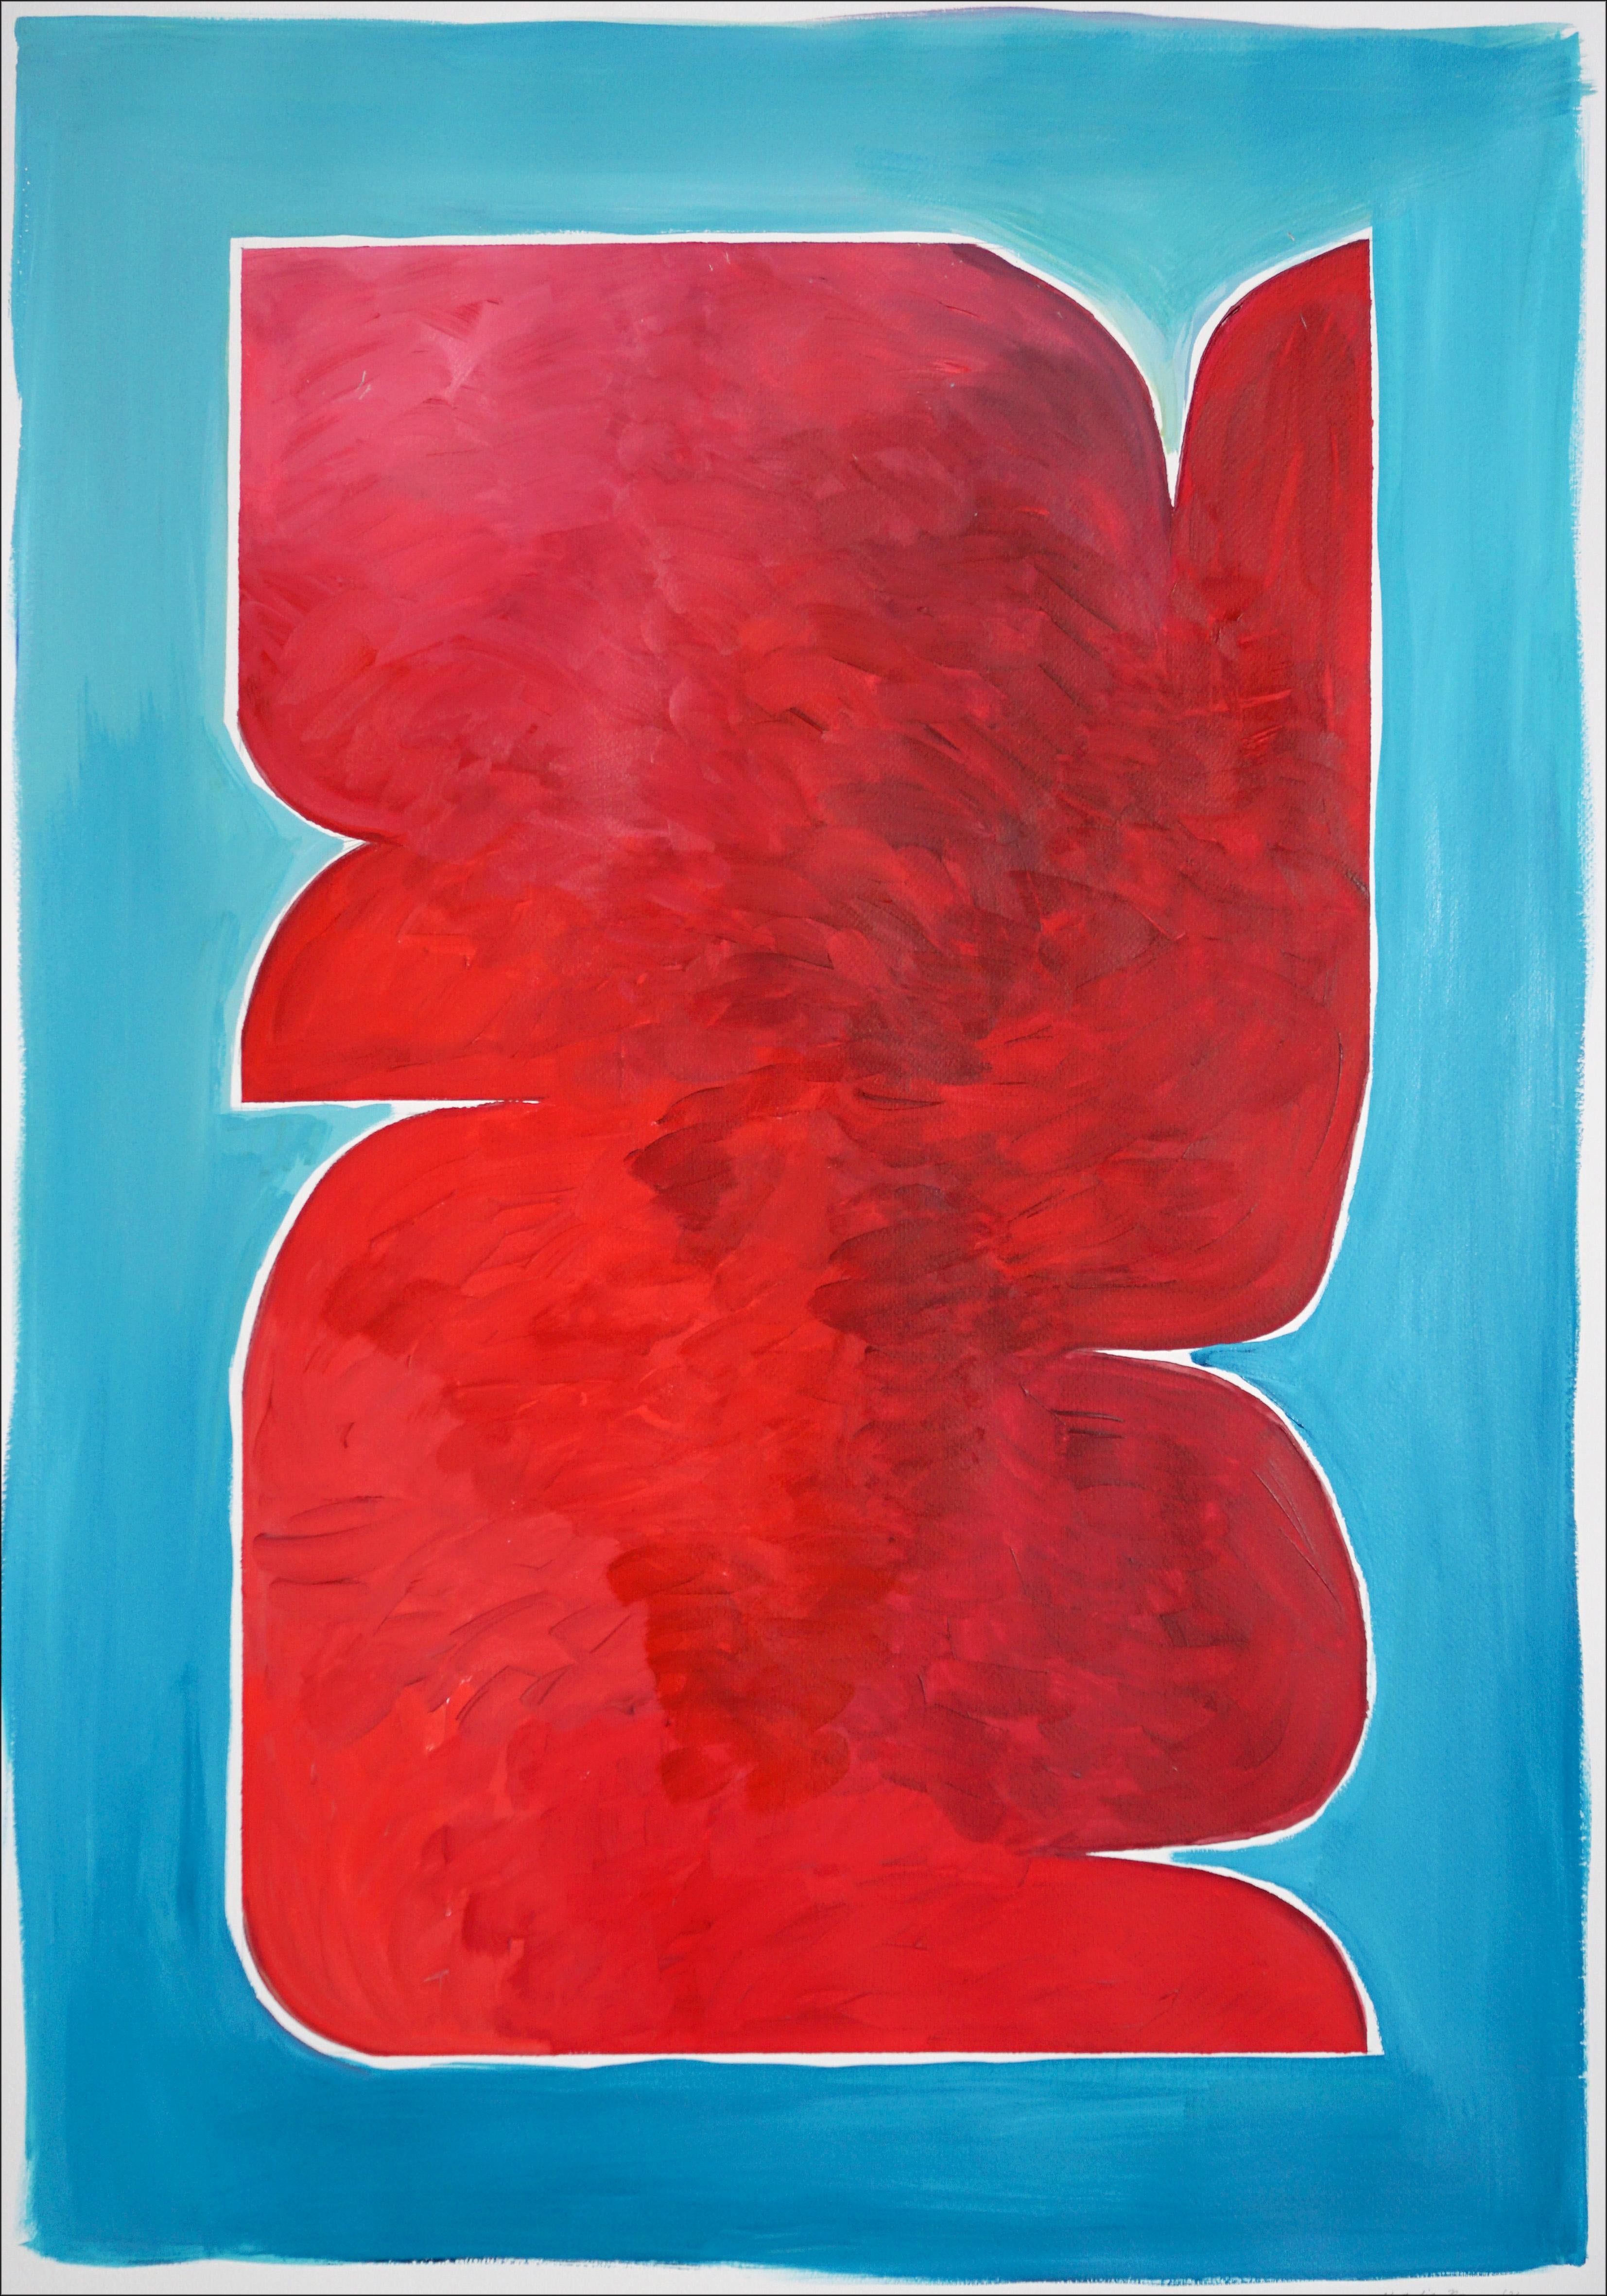 Natalia Roman Figurative Painting - Red Sculptural Contours on Blue, Abstract Tribal Silhouette, Organic Monolith 